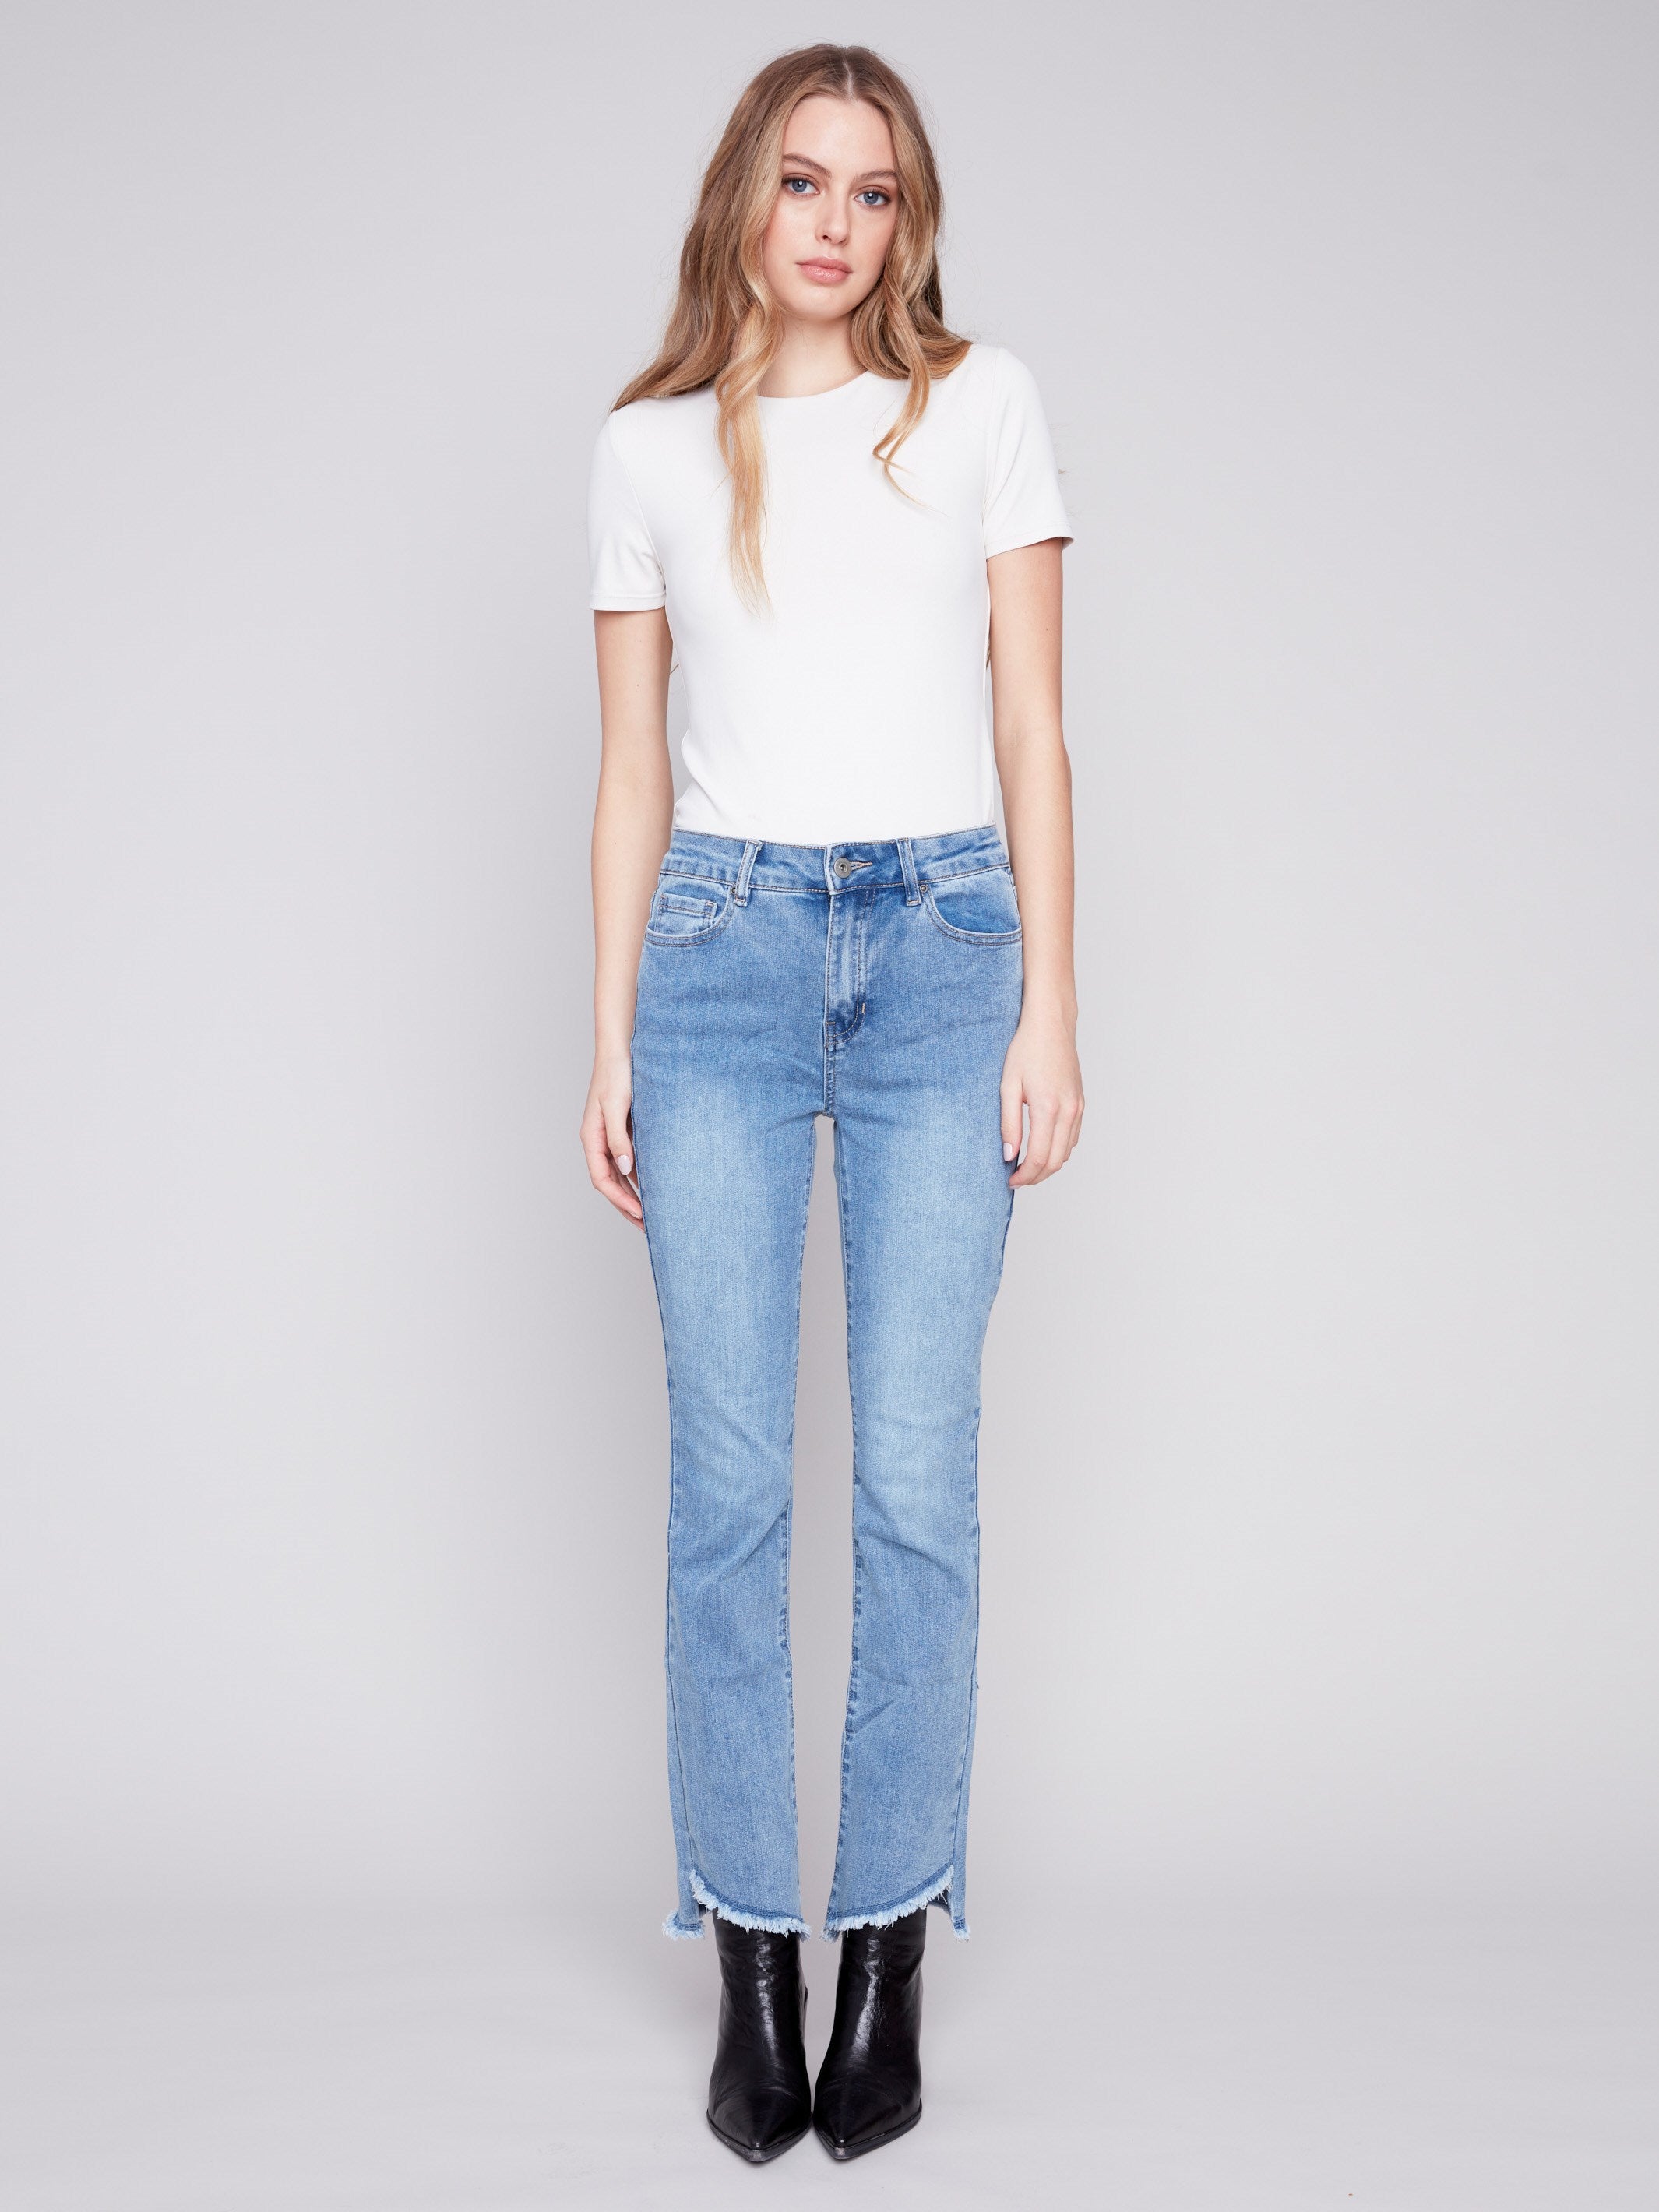 Bootcut Jeans with Asymmetrical Hem - Light Blue - Charlie B Collection Canada - Image 5